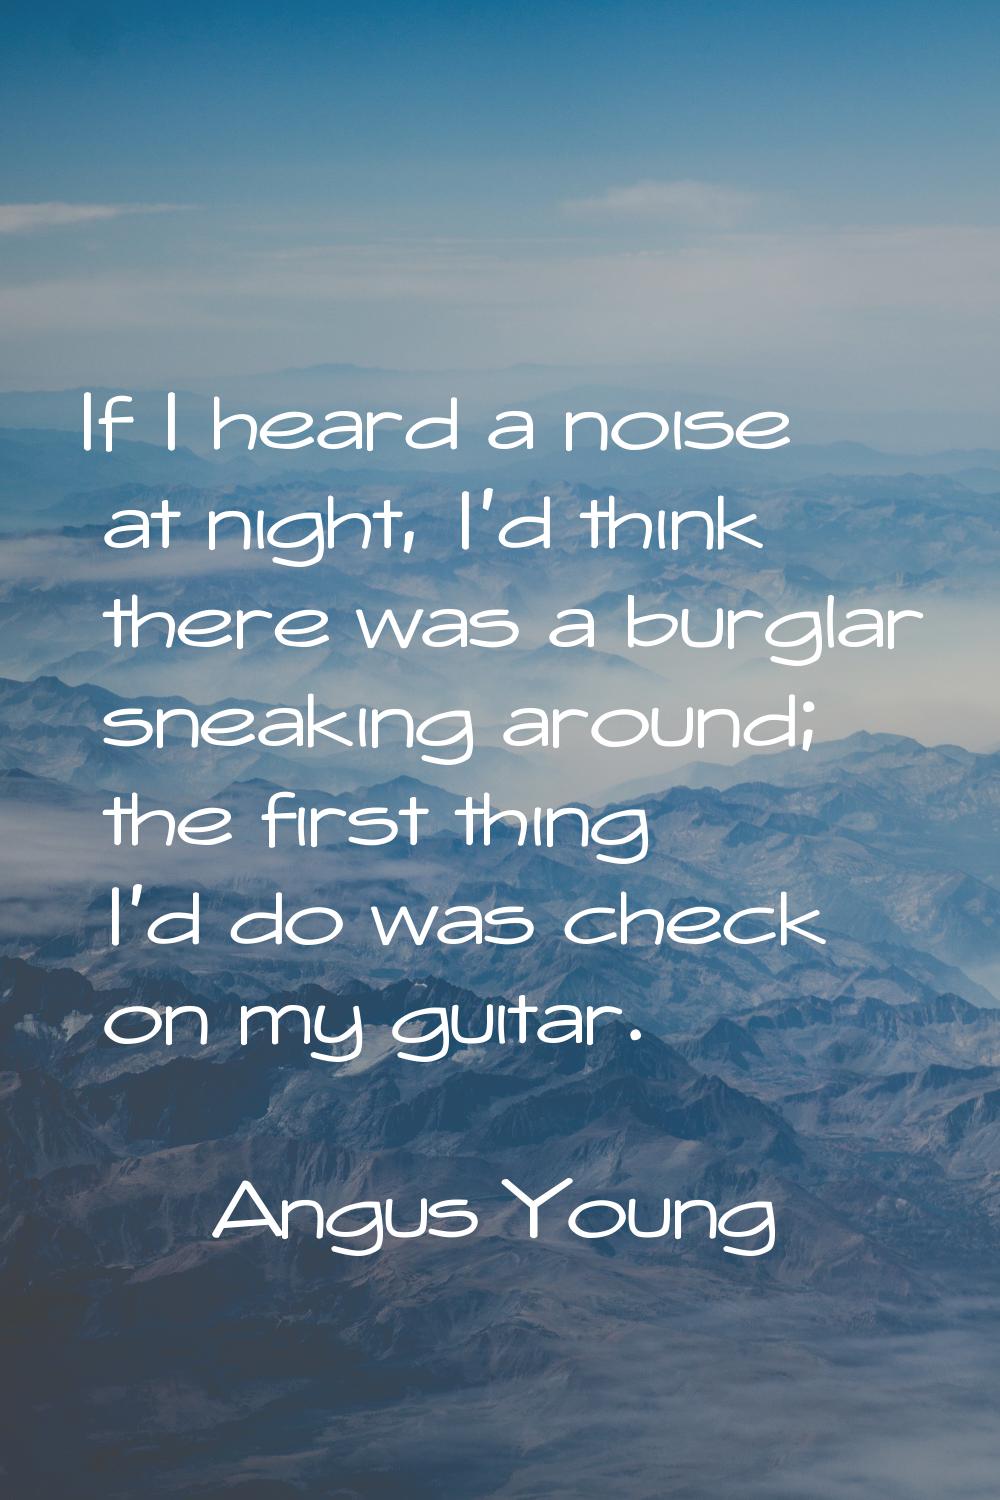 If I heard a noise at night, I'd think there was a burglar sneaking around; the first thing I'd do 